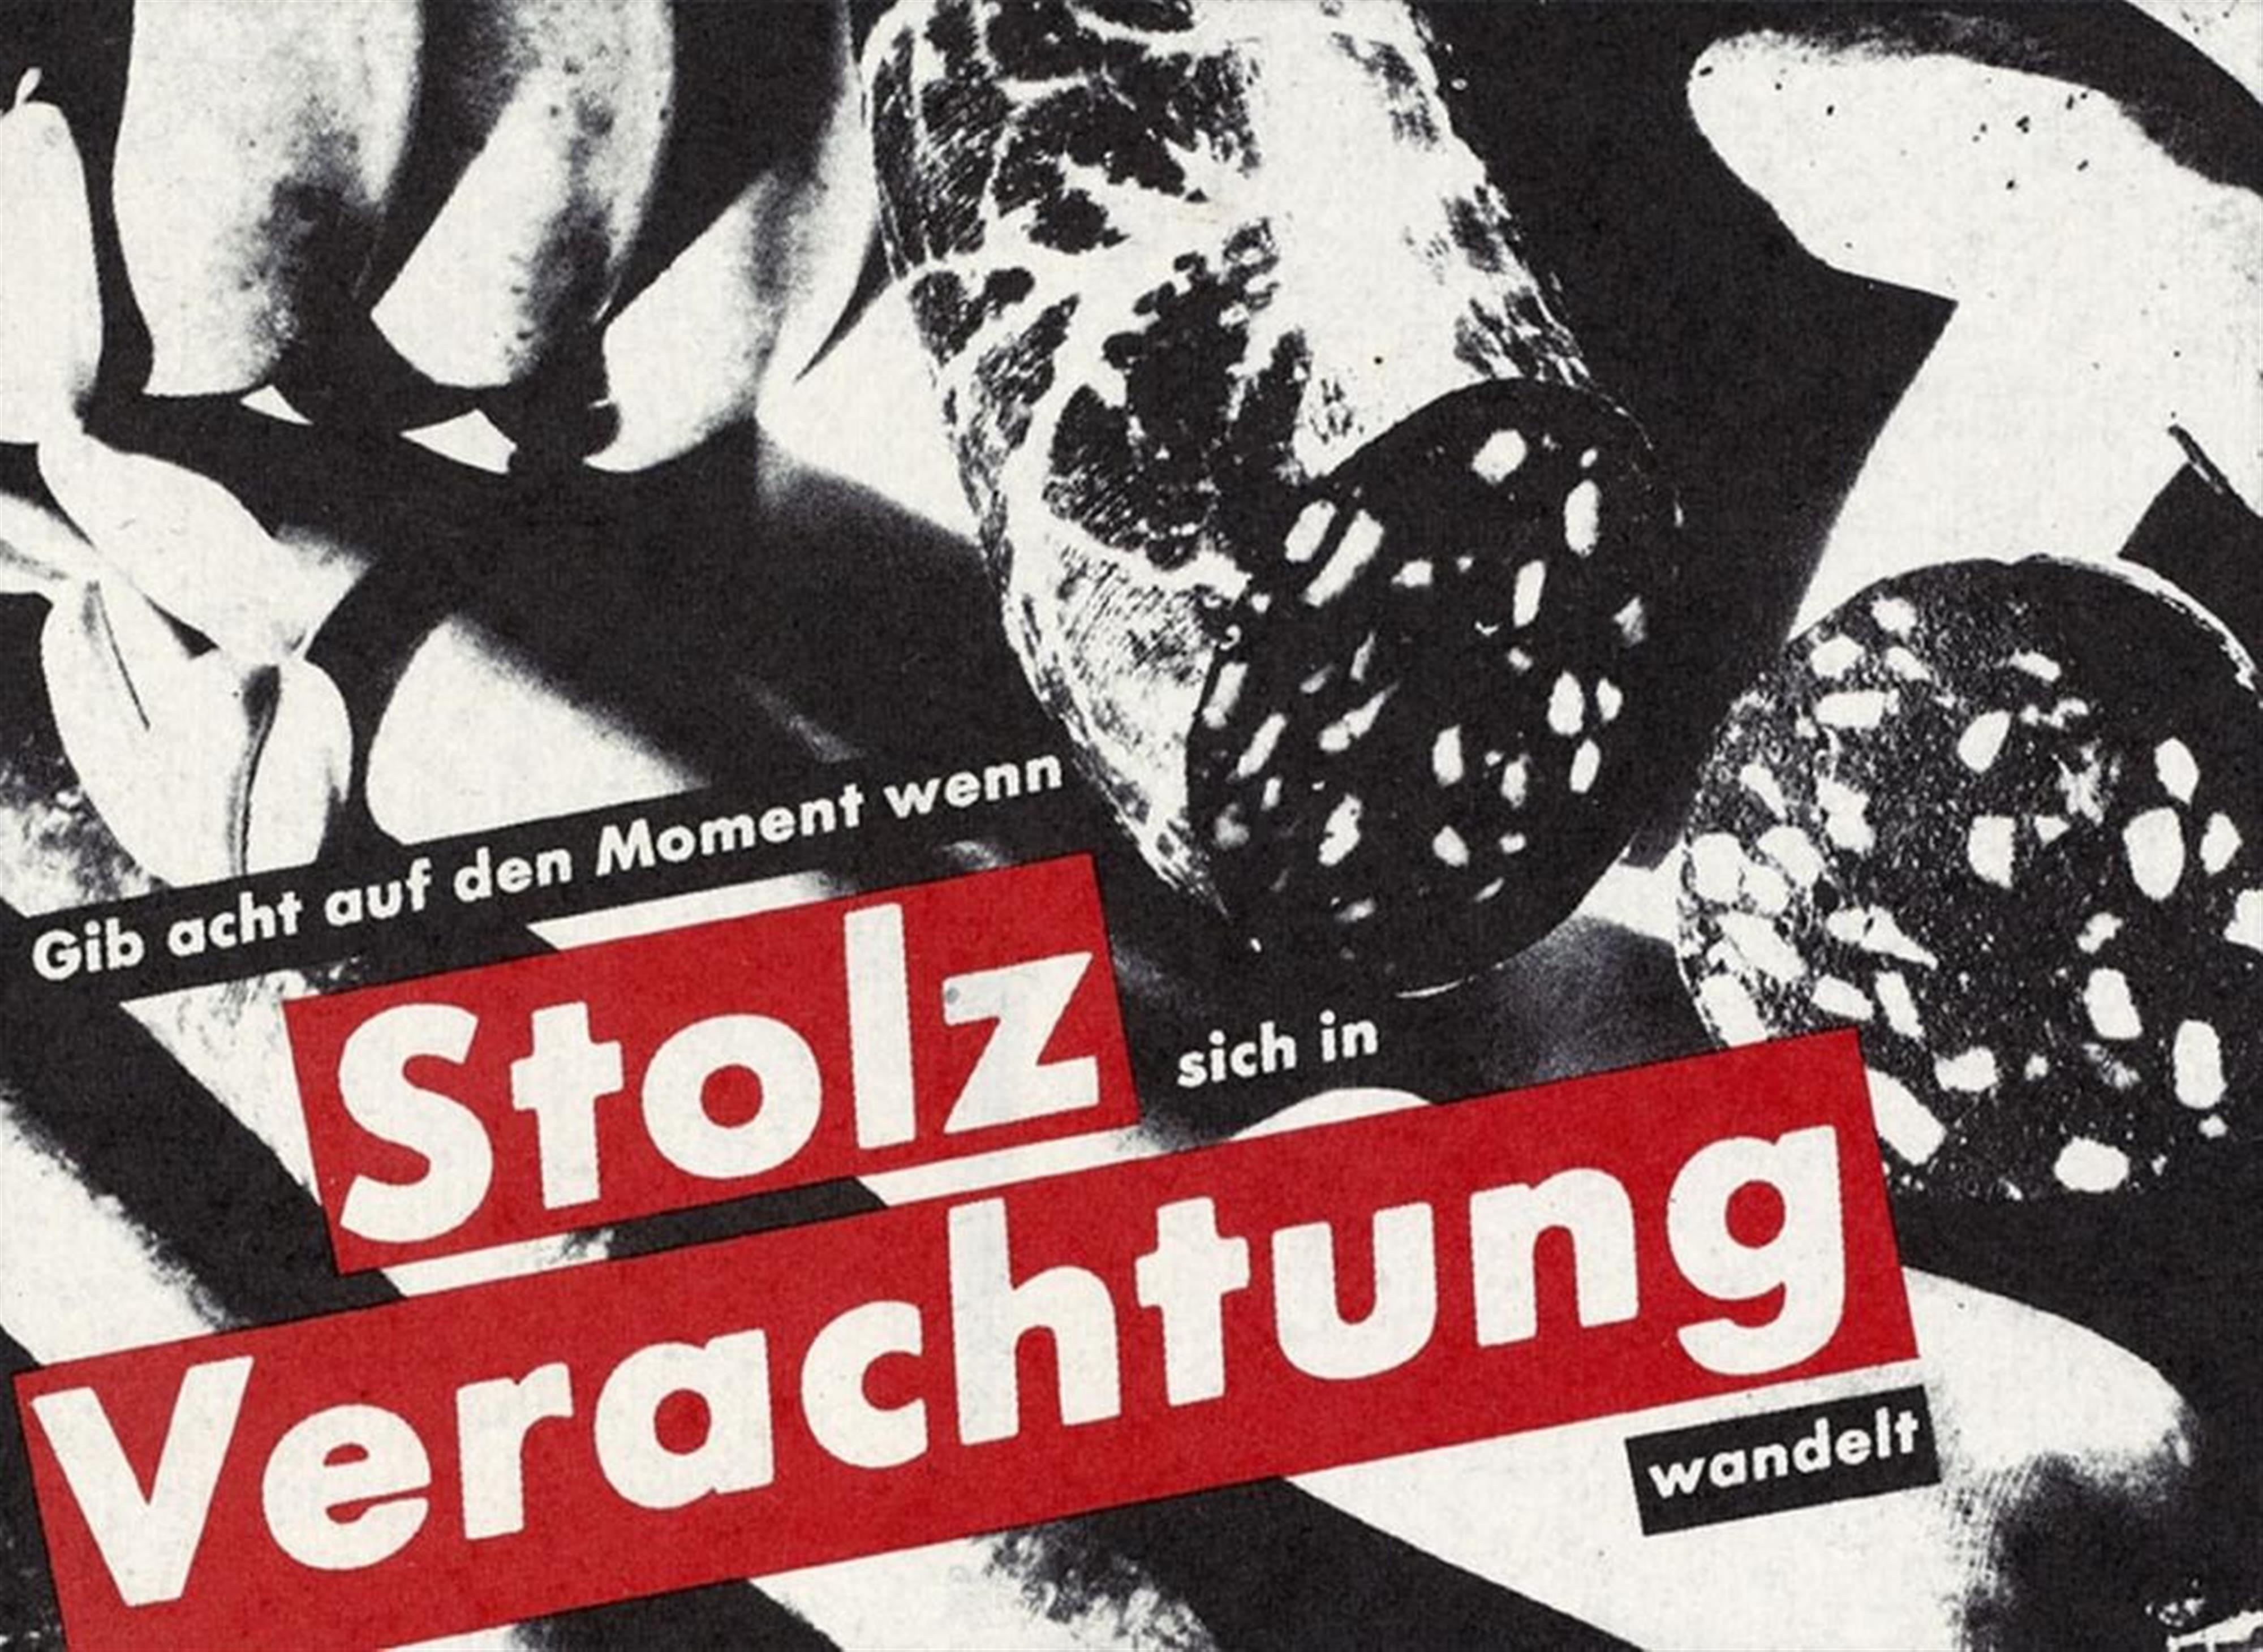 Barbara Kruger - Gib' acht auf den Moment wenn Stolz sich in Verachtung wandelt (pay attention to the moment when prides turns into contempt)